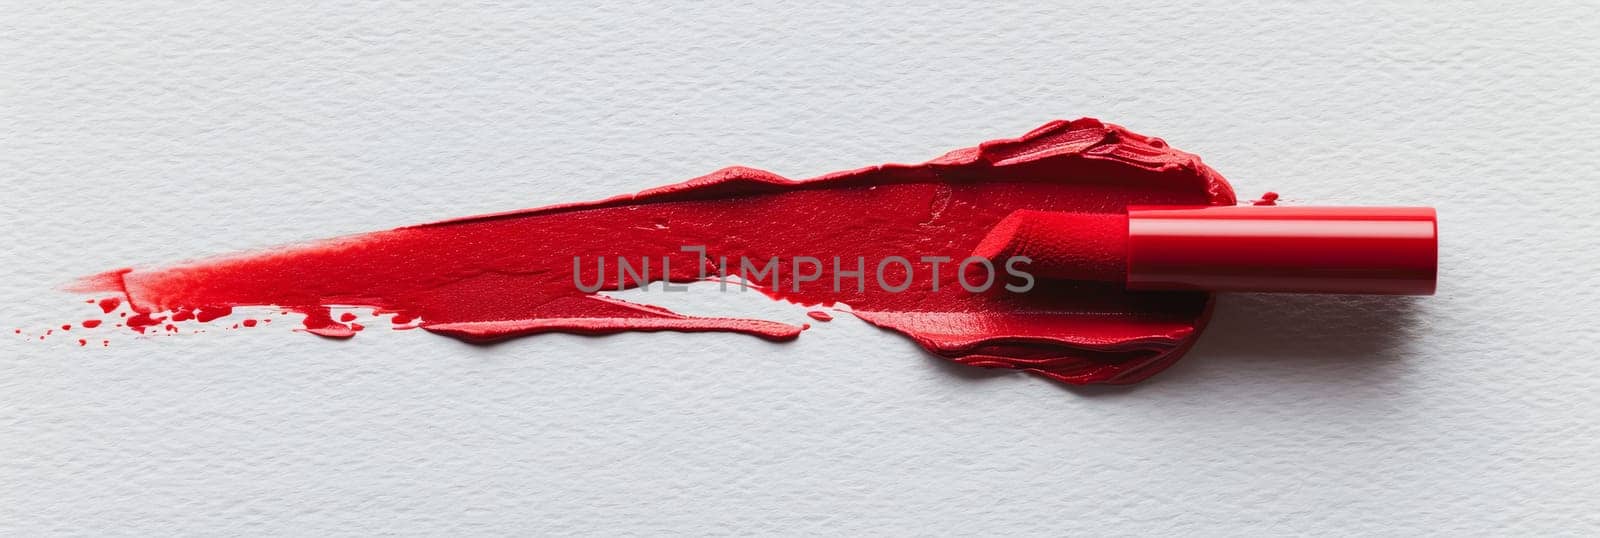 A close-up of a crimson lipstick smudge on paper, creating a romantic and fleeting mark of passion.